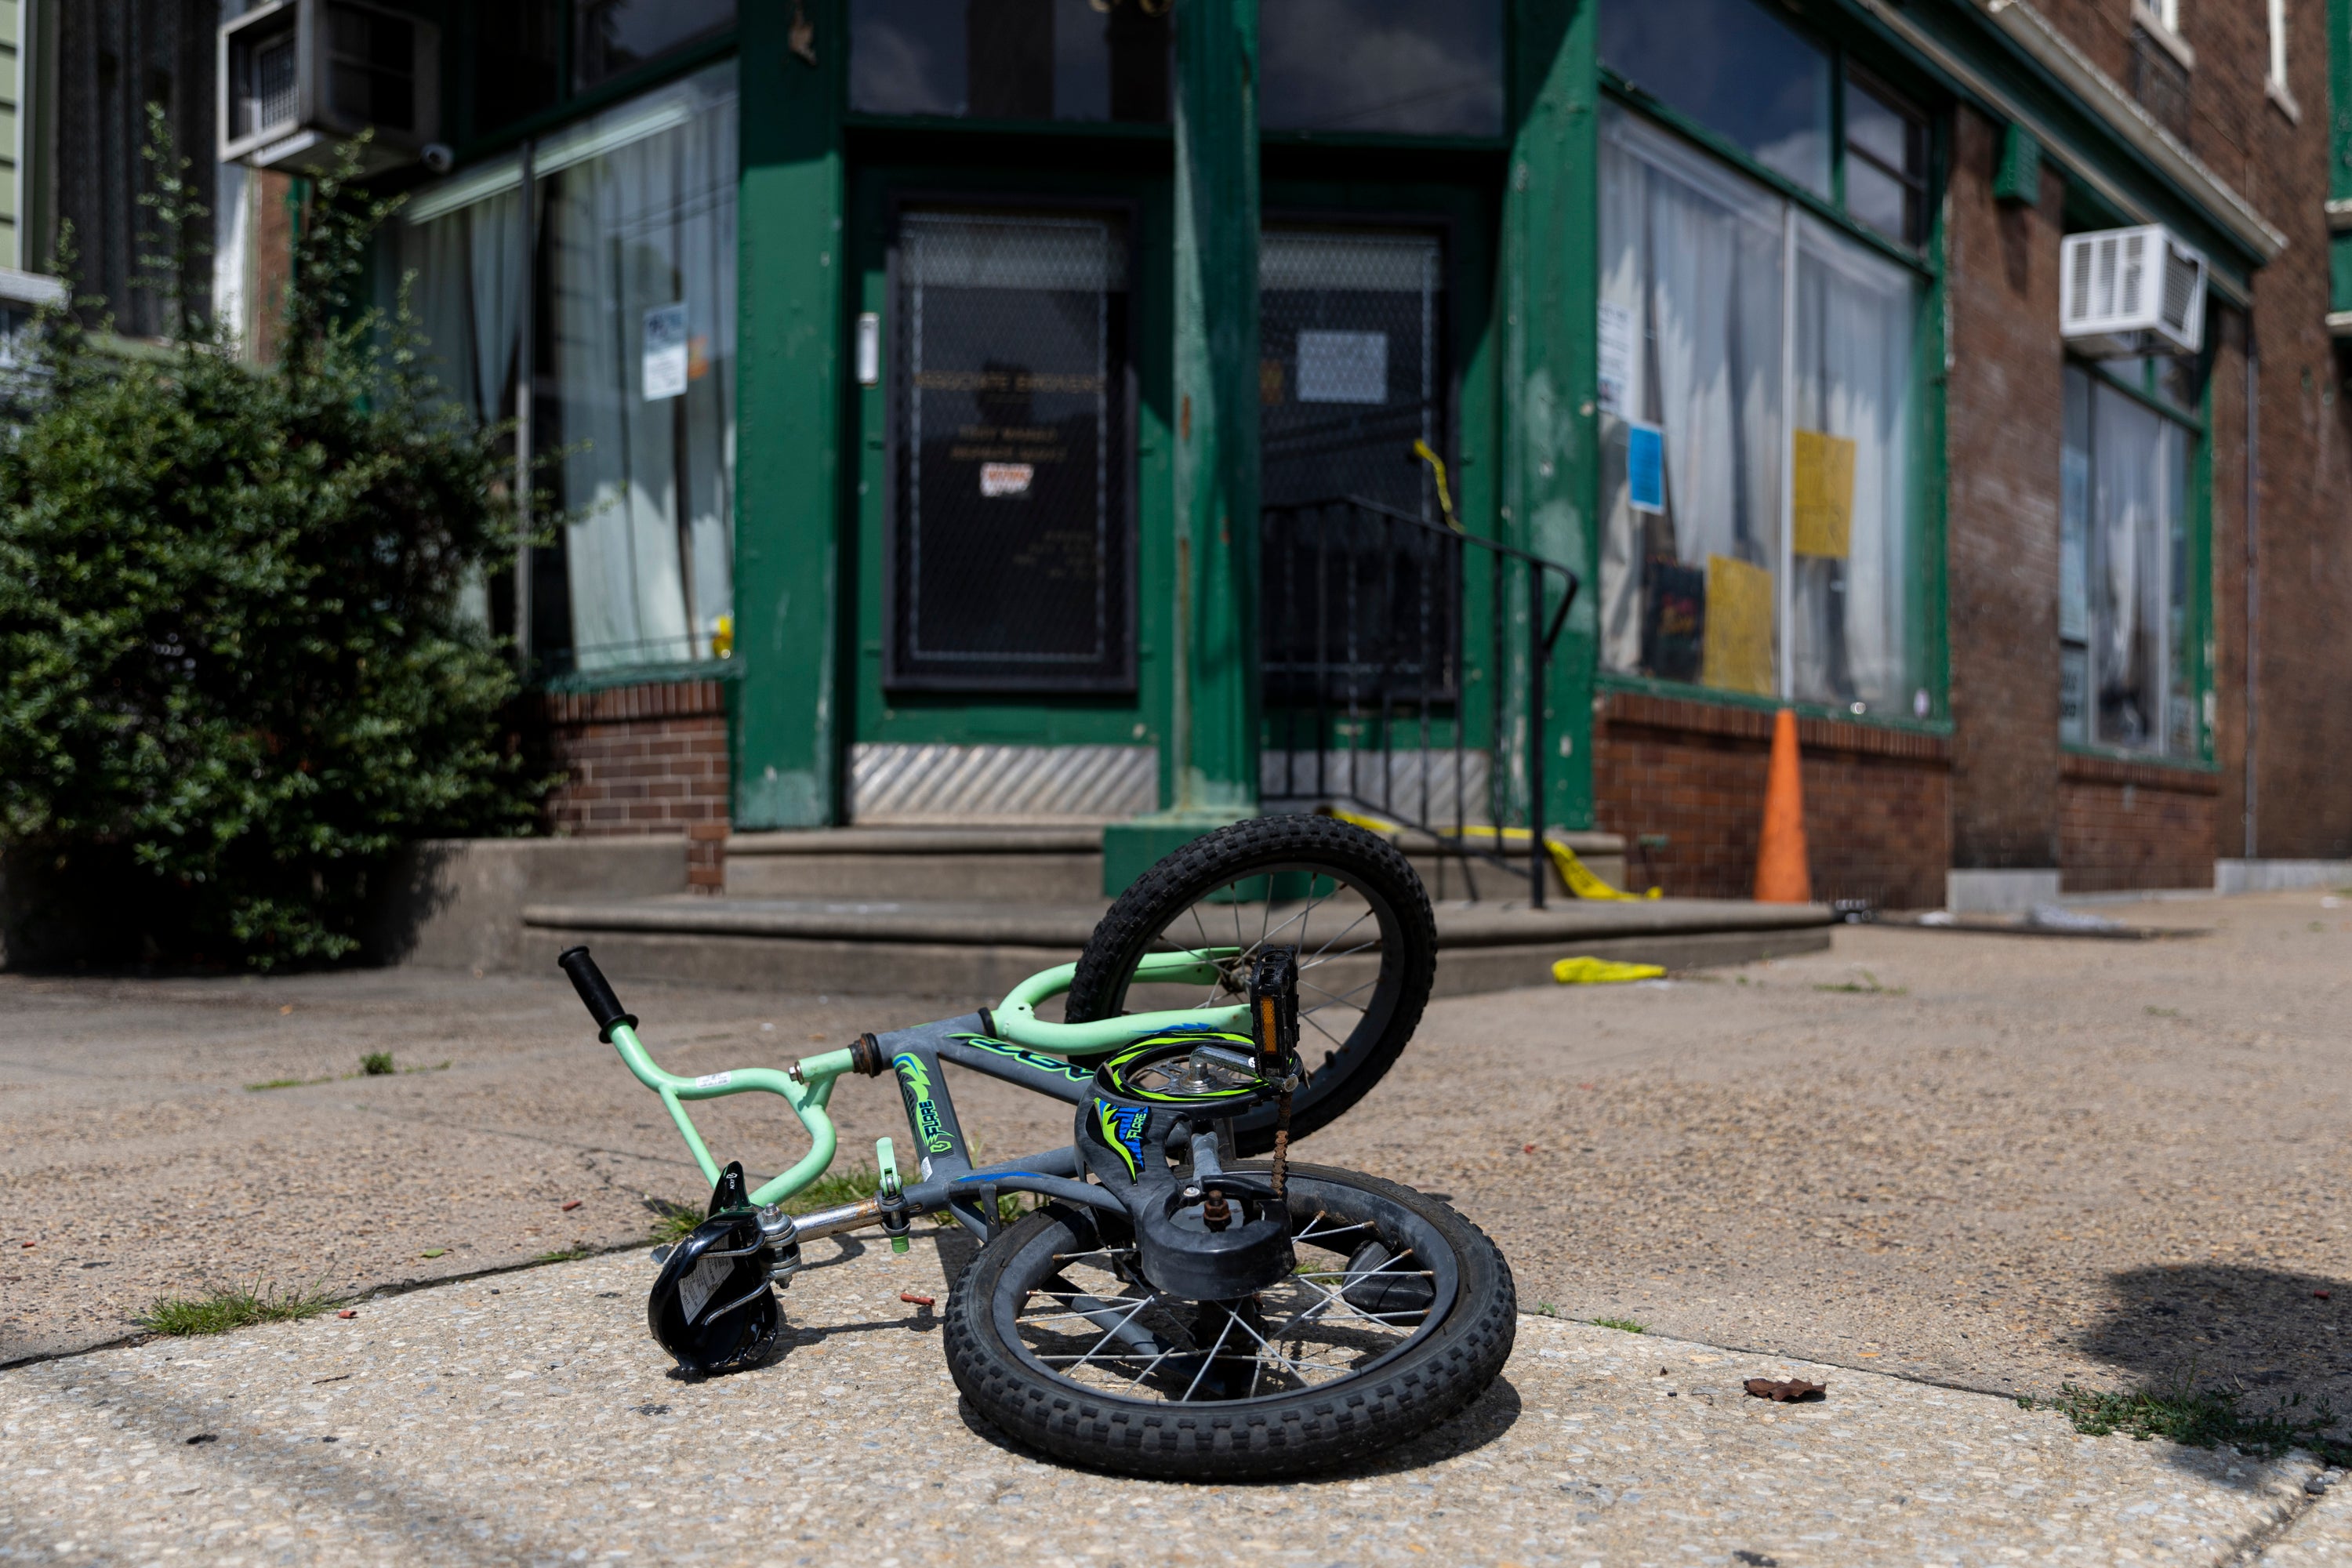 A child’s bike left at the scene of a shooting in Philadelphia that claimed five lives on Monday night